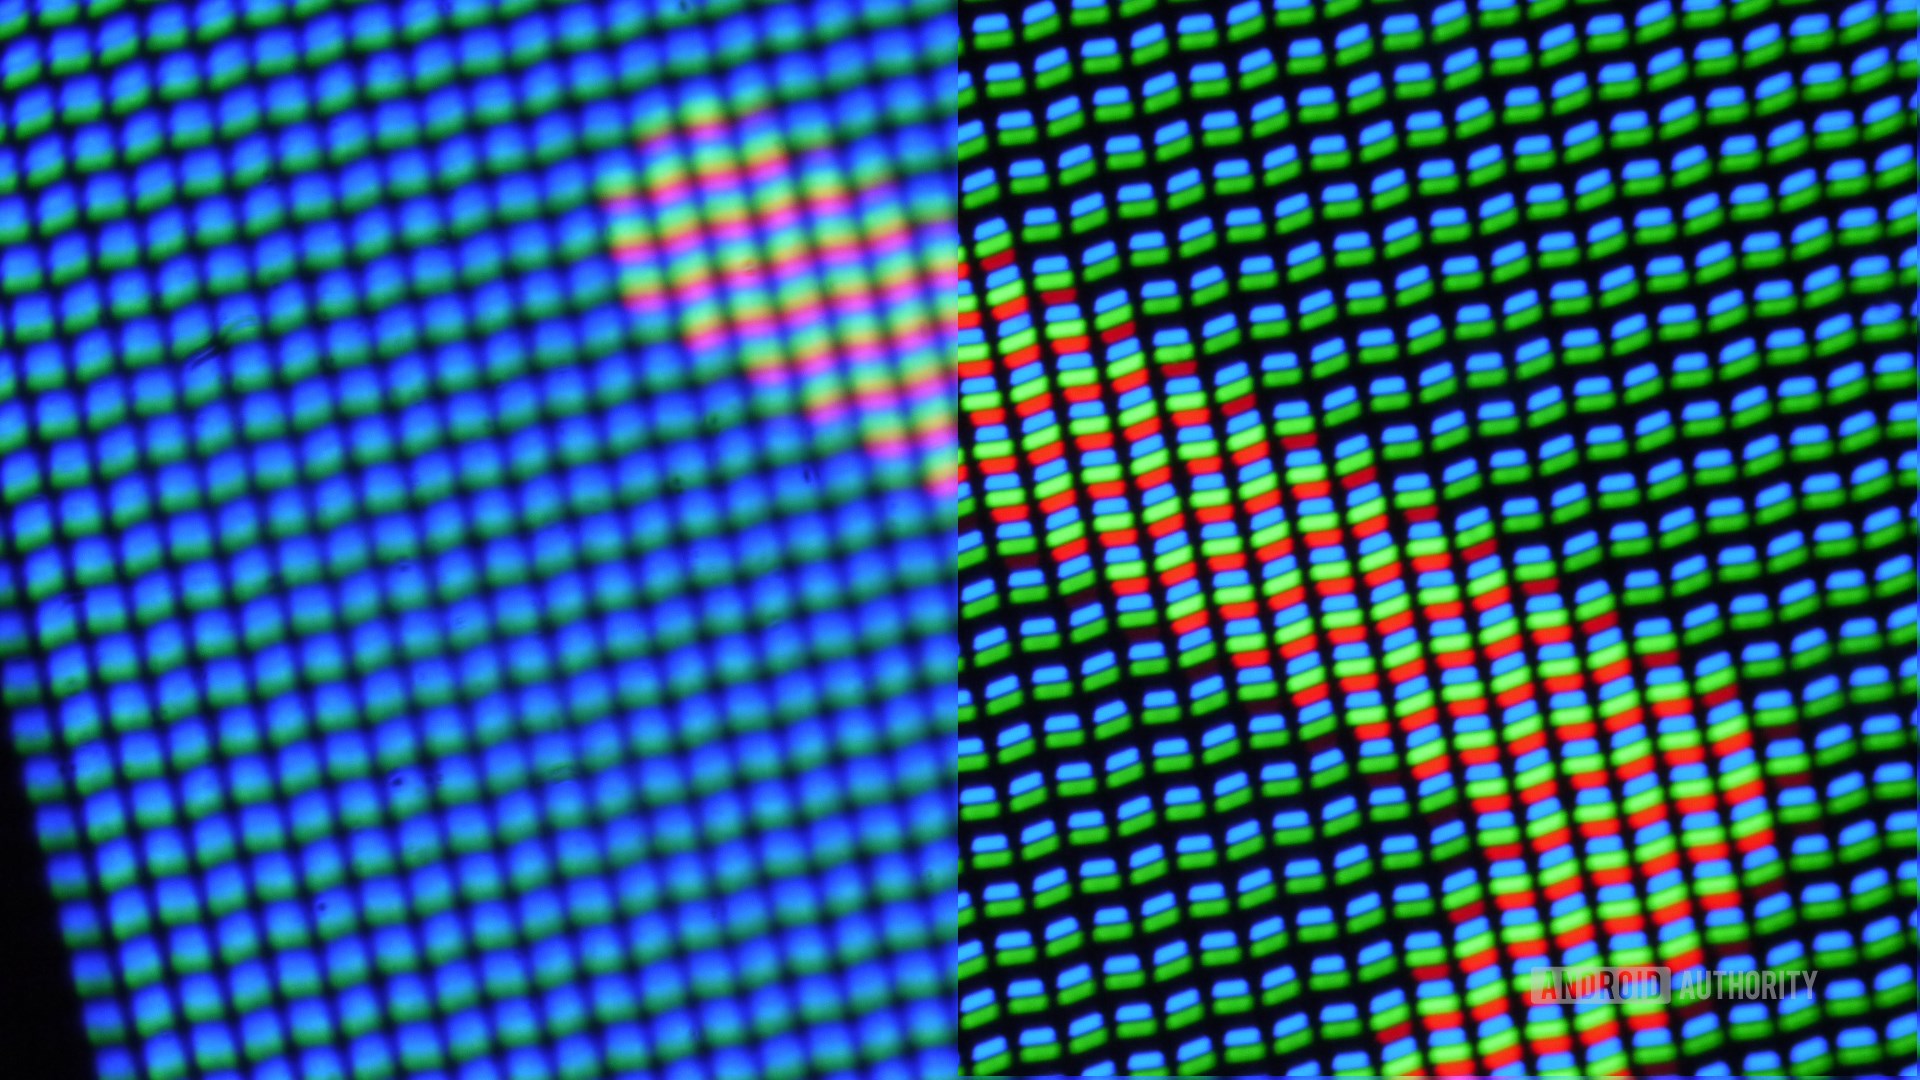 LCD close-up showing how colors are formed.